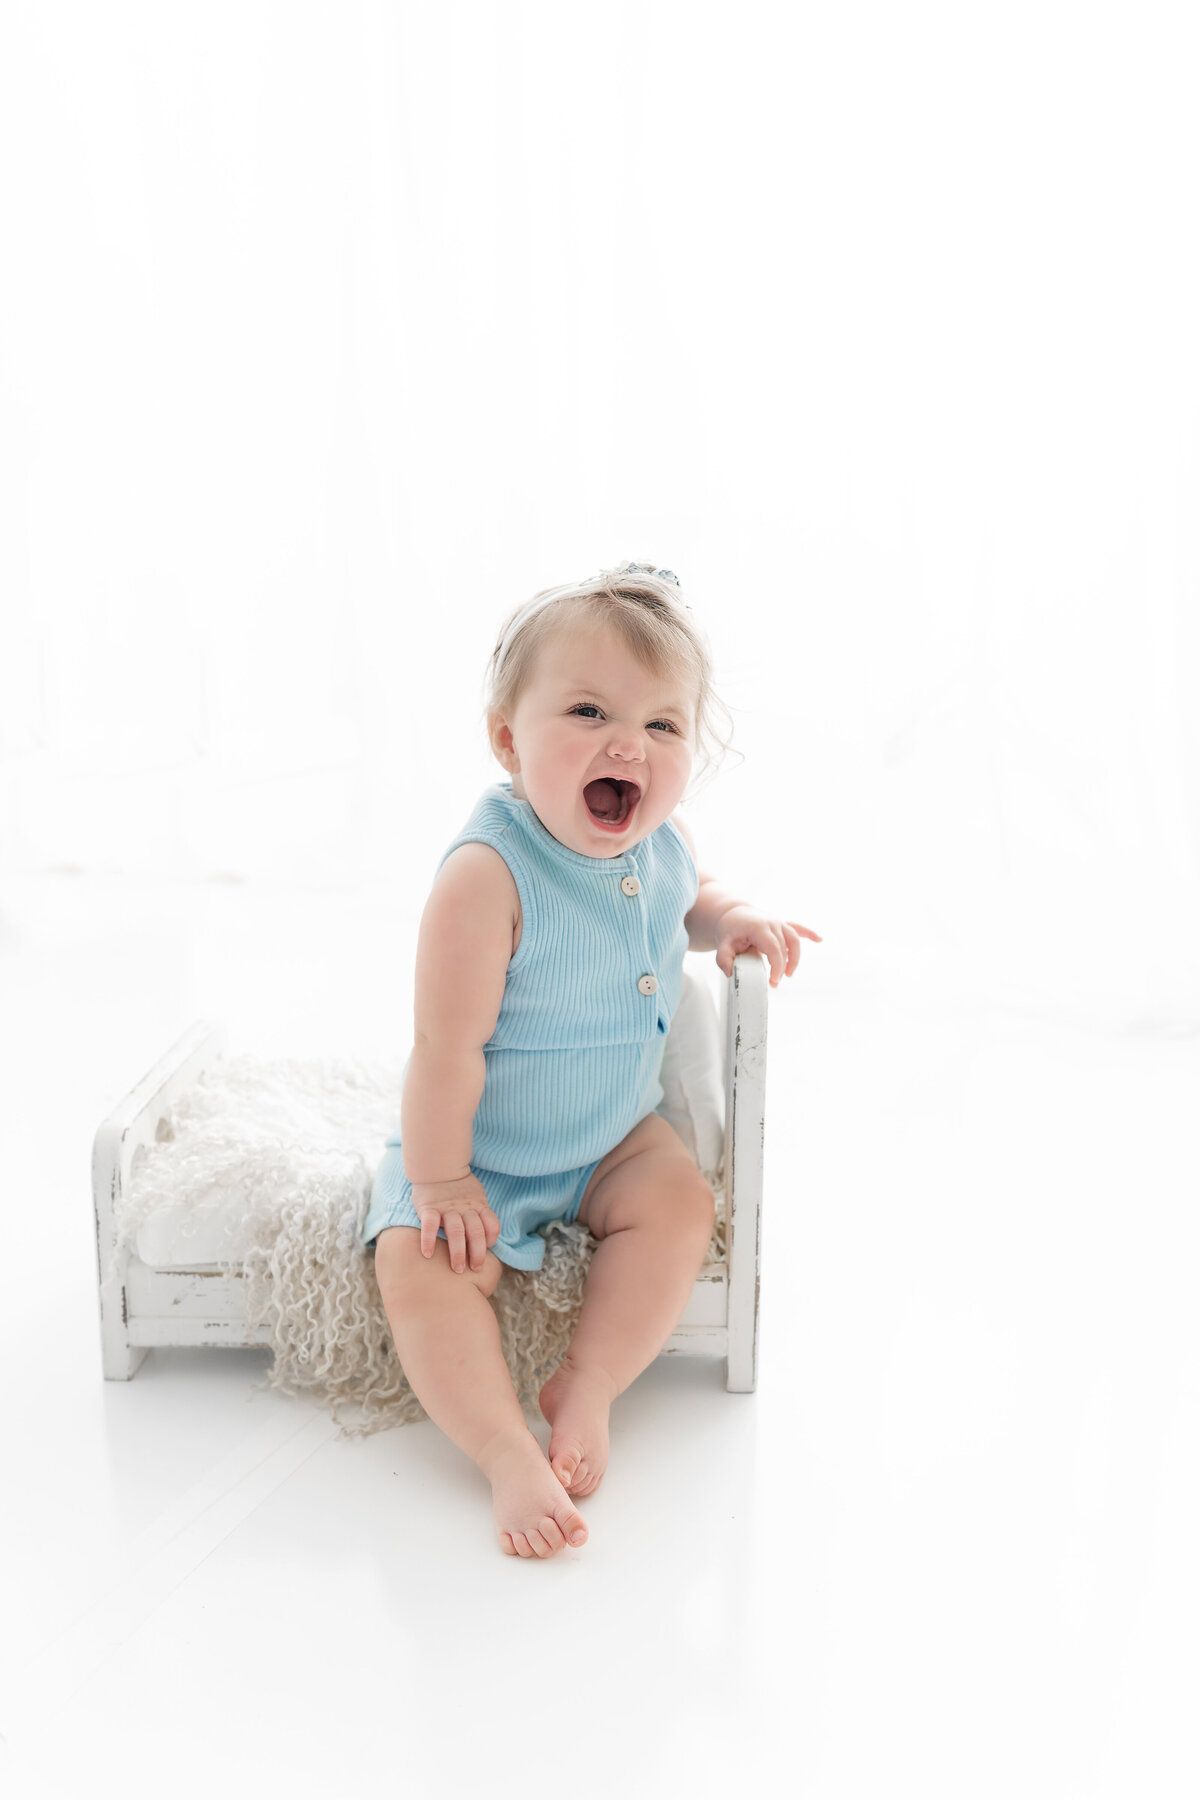 A toddler girl yawns big while sitting on a tiny wooden bed in a blue onesie